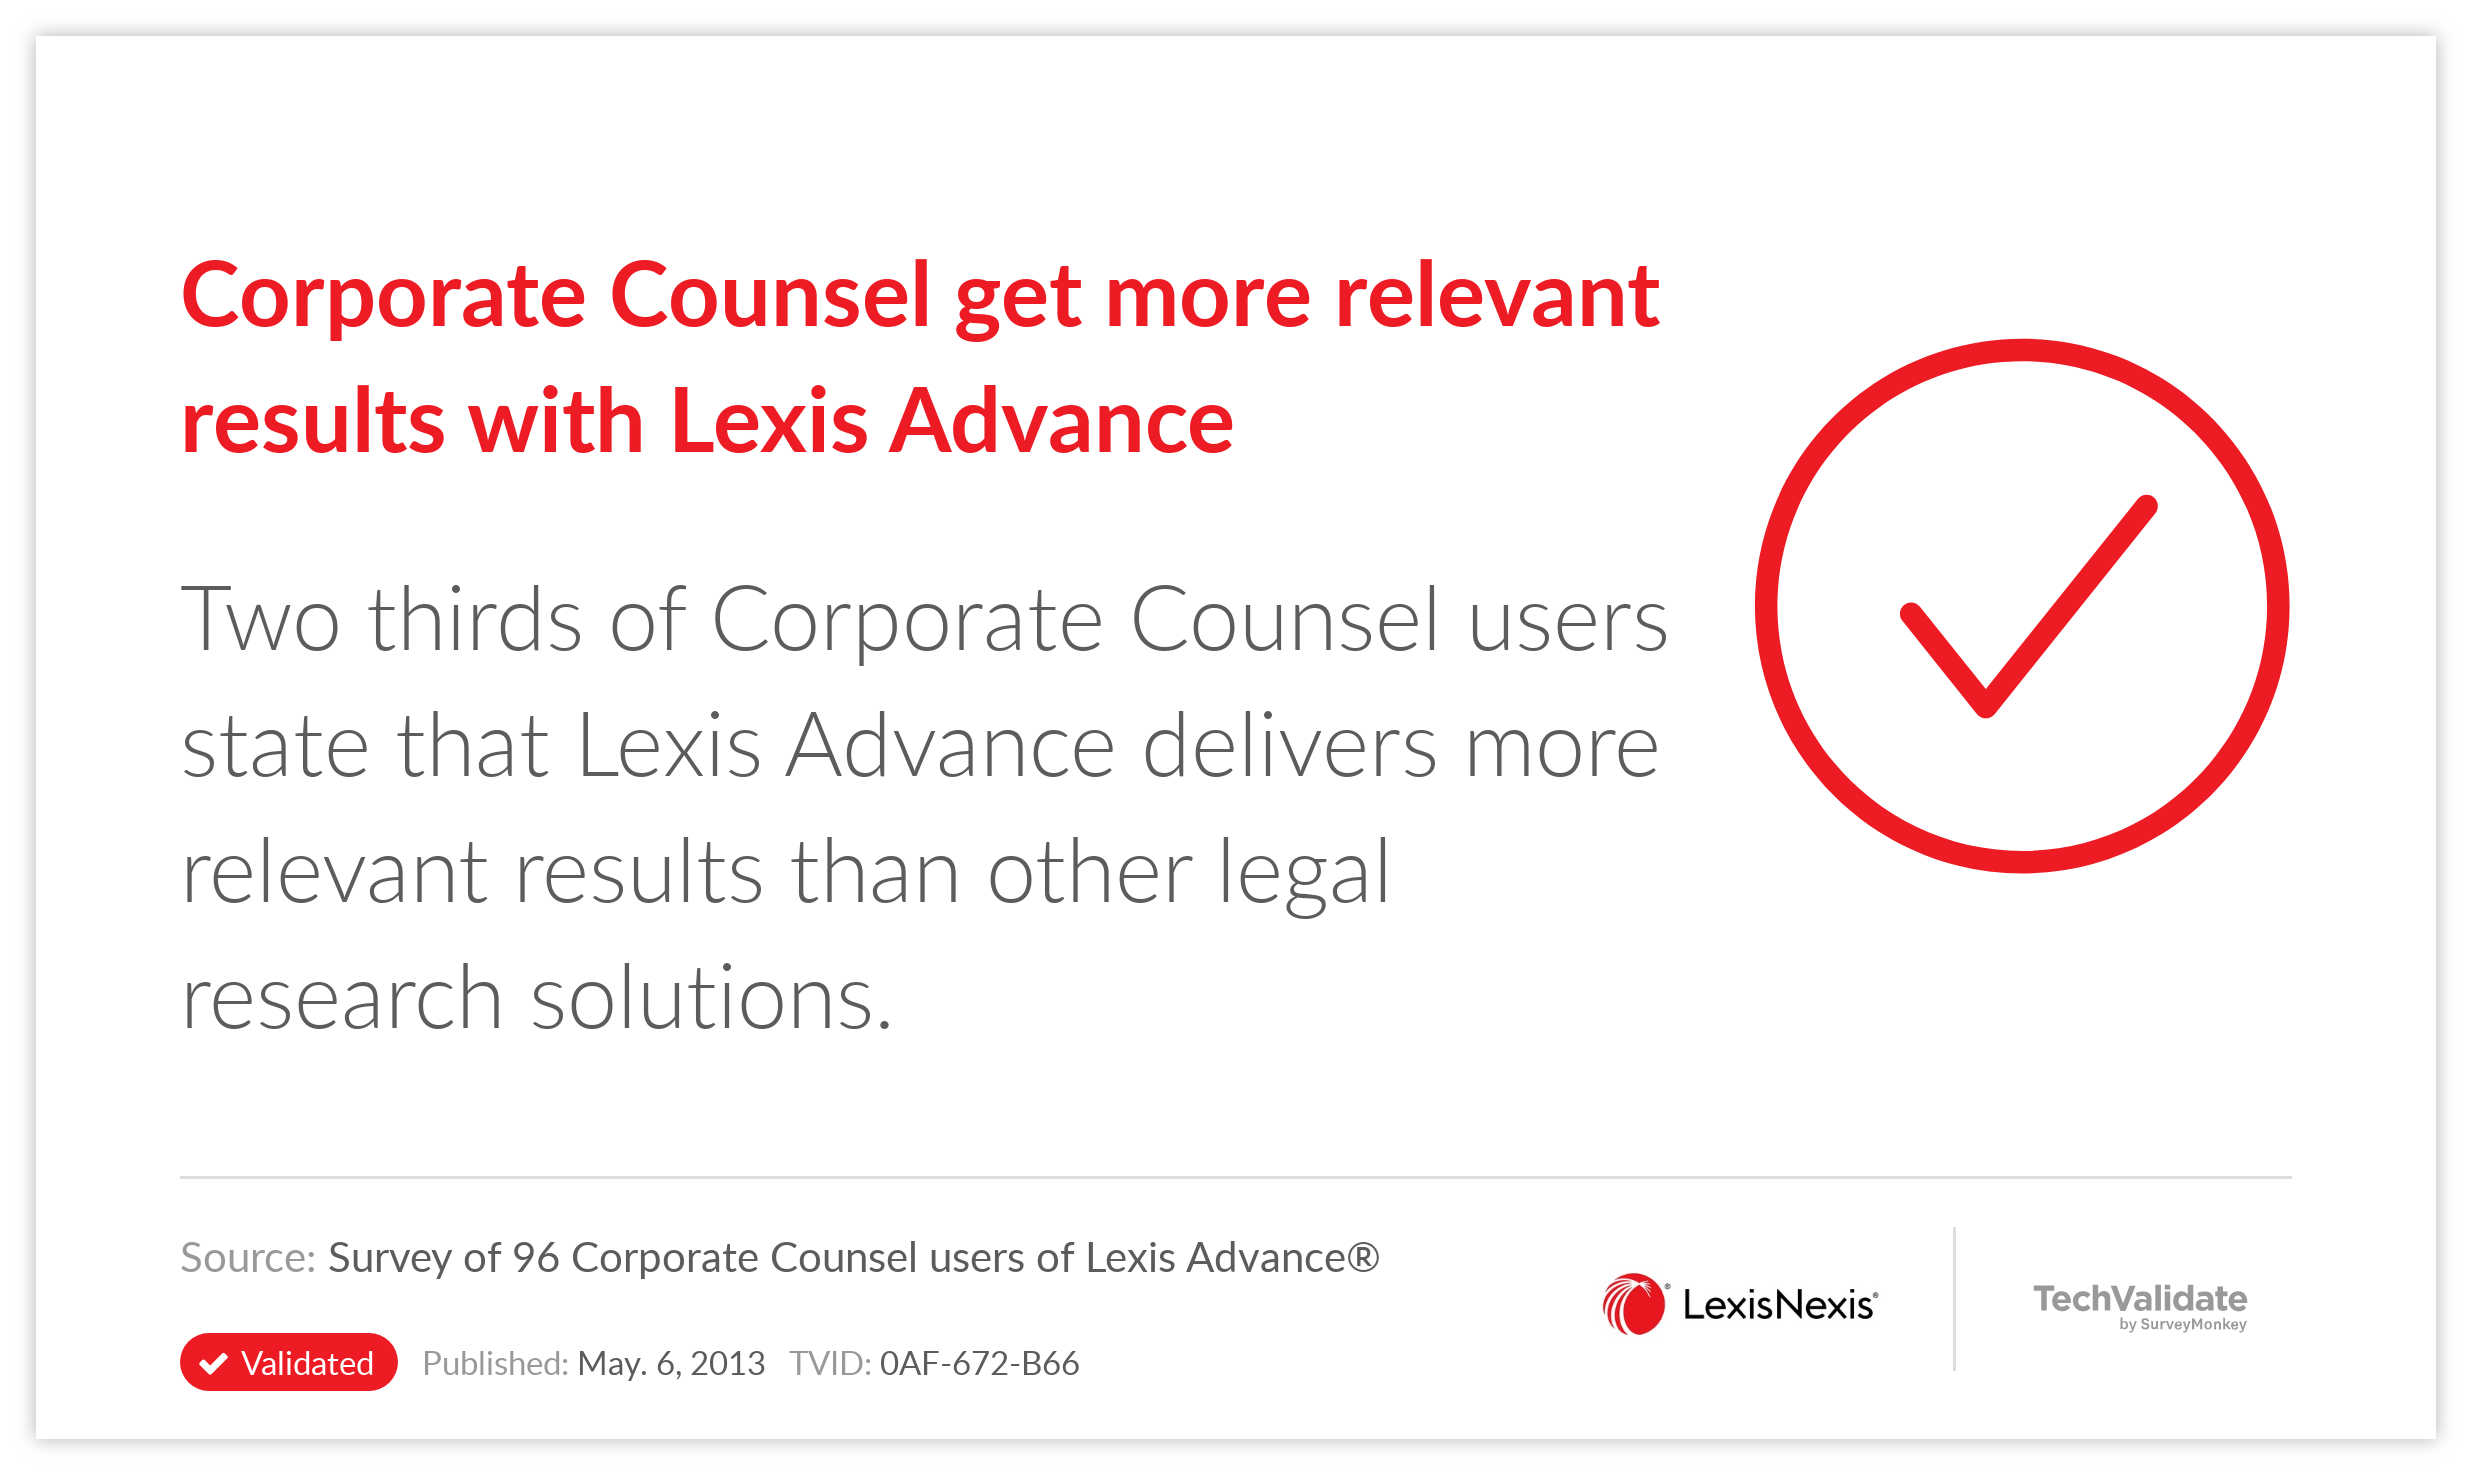 Corporate Counsel get more relevant results with Lexis Advance